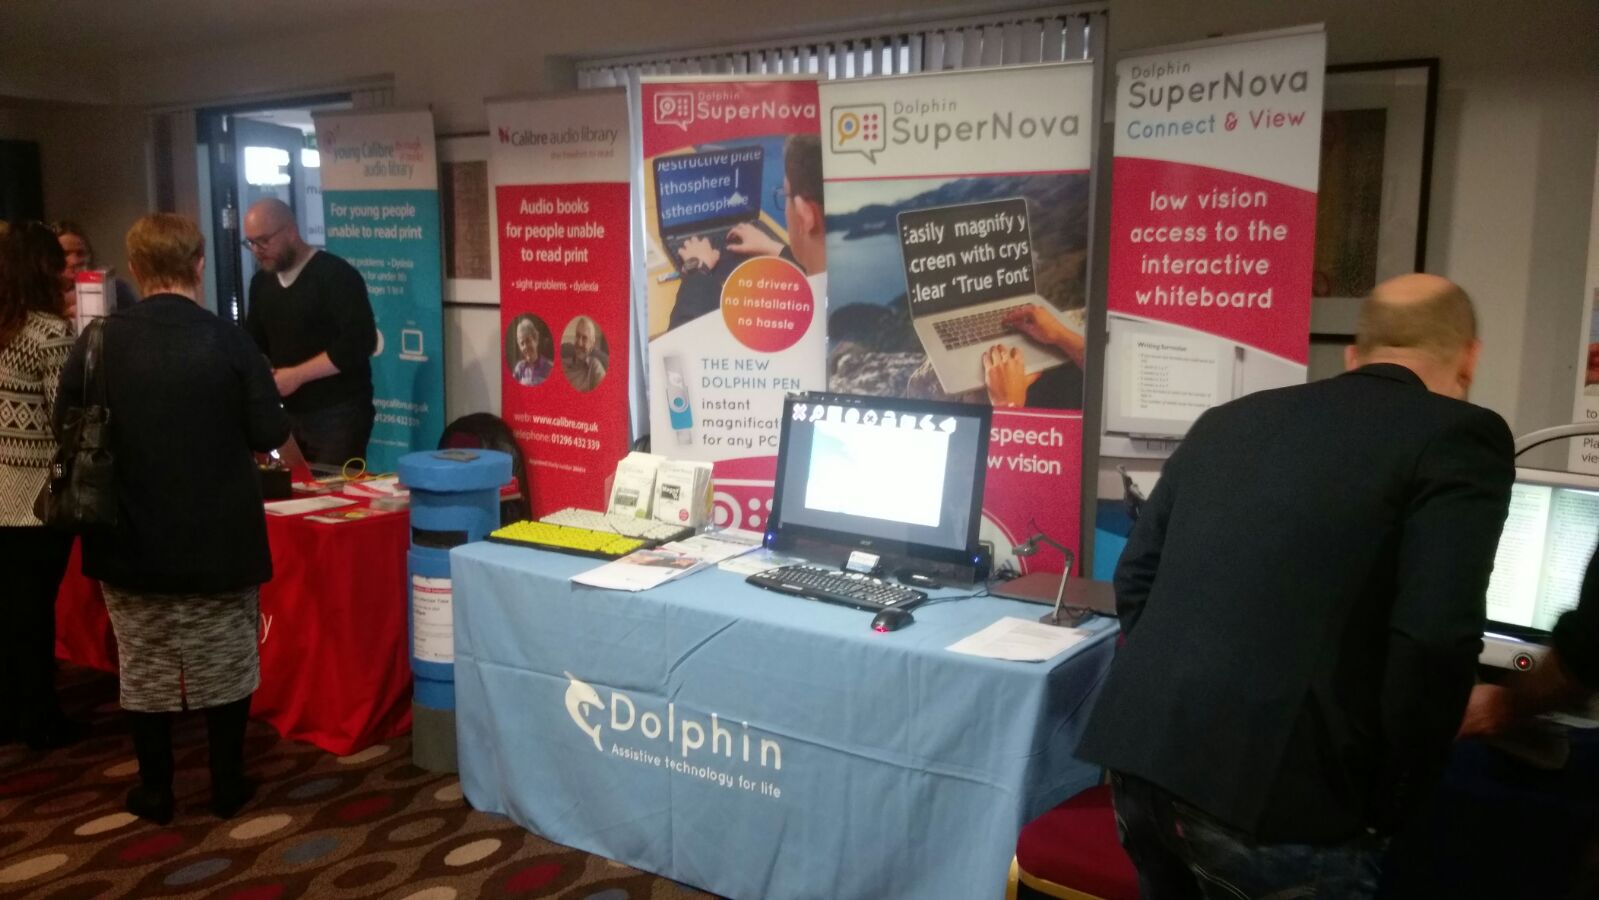 The Dolphin exhibition stand